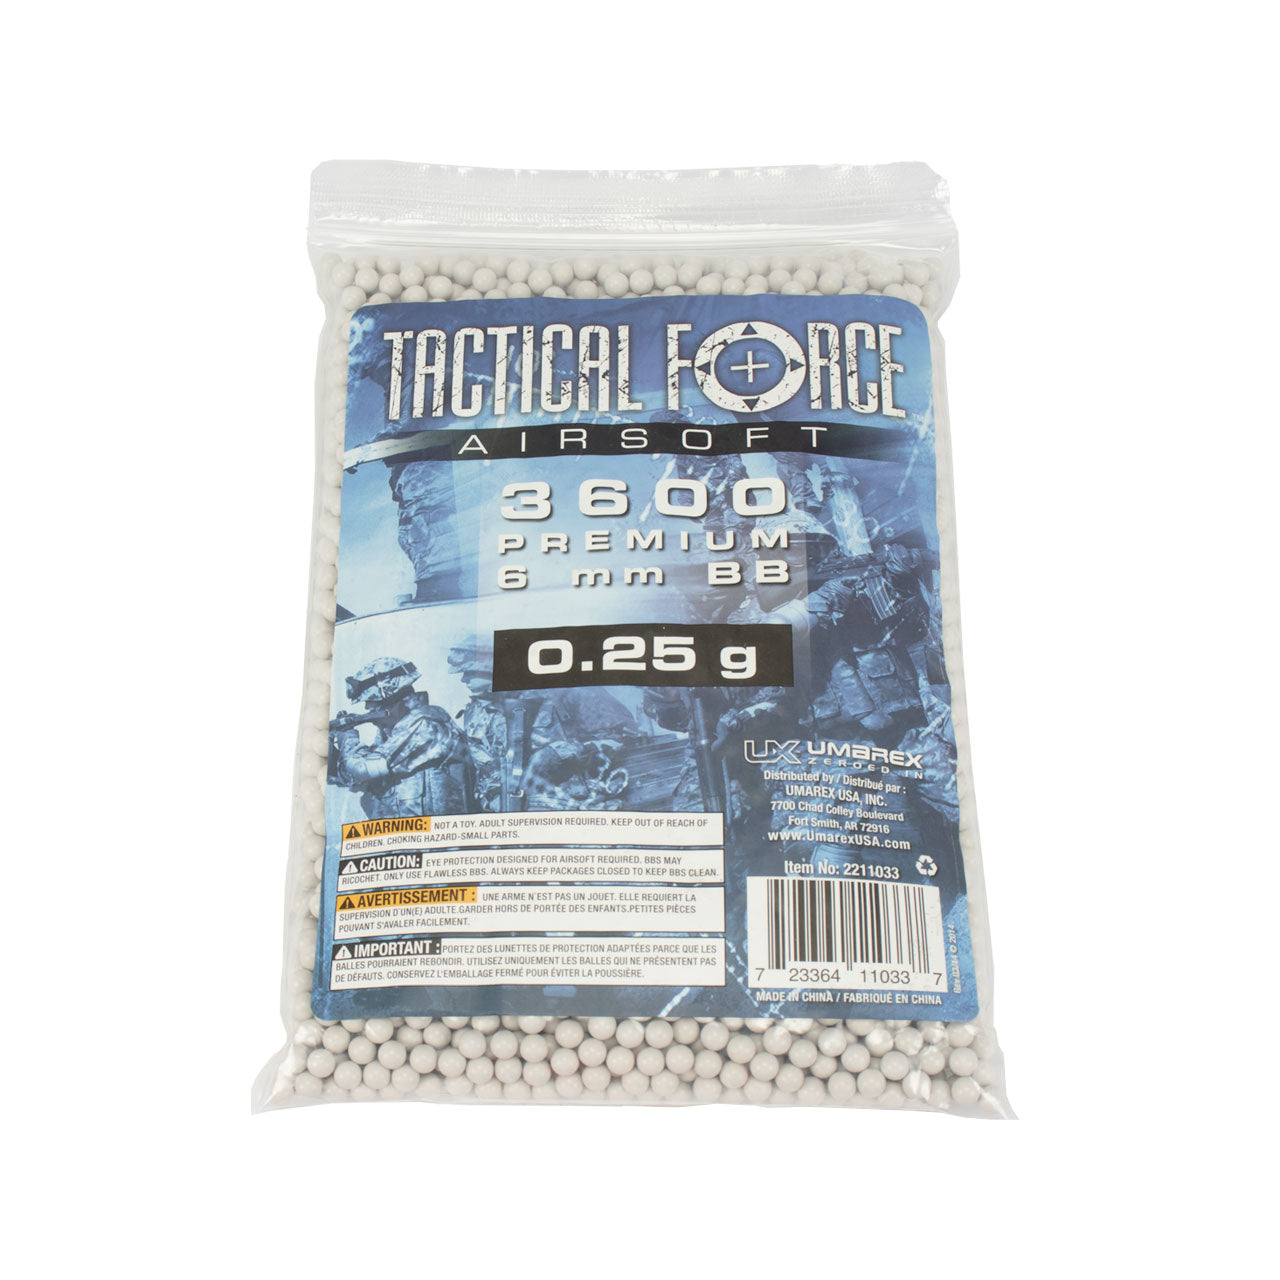 Tactical Force .25 Premium 6MM Airsoft BB's (3600 Count)